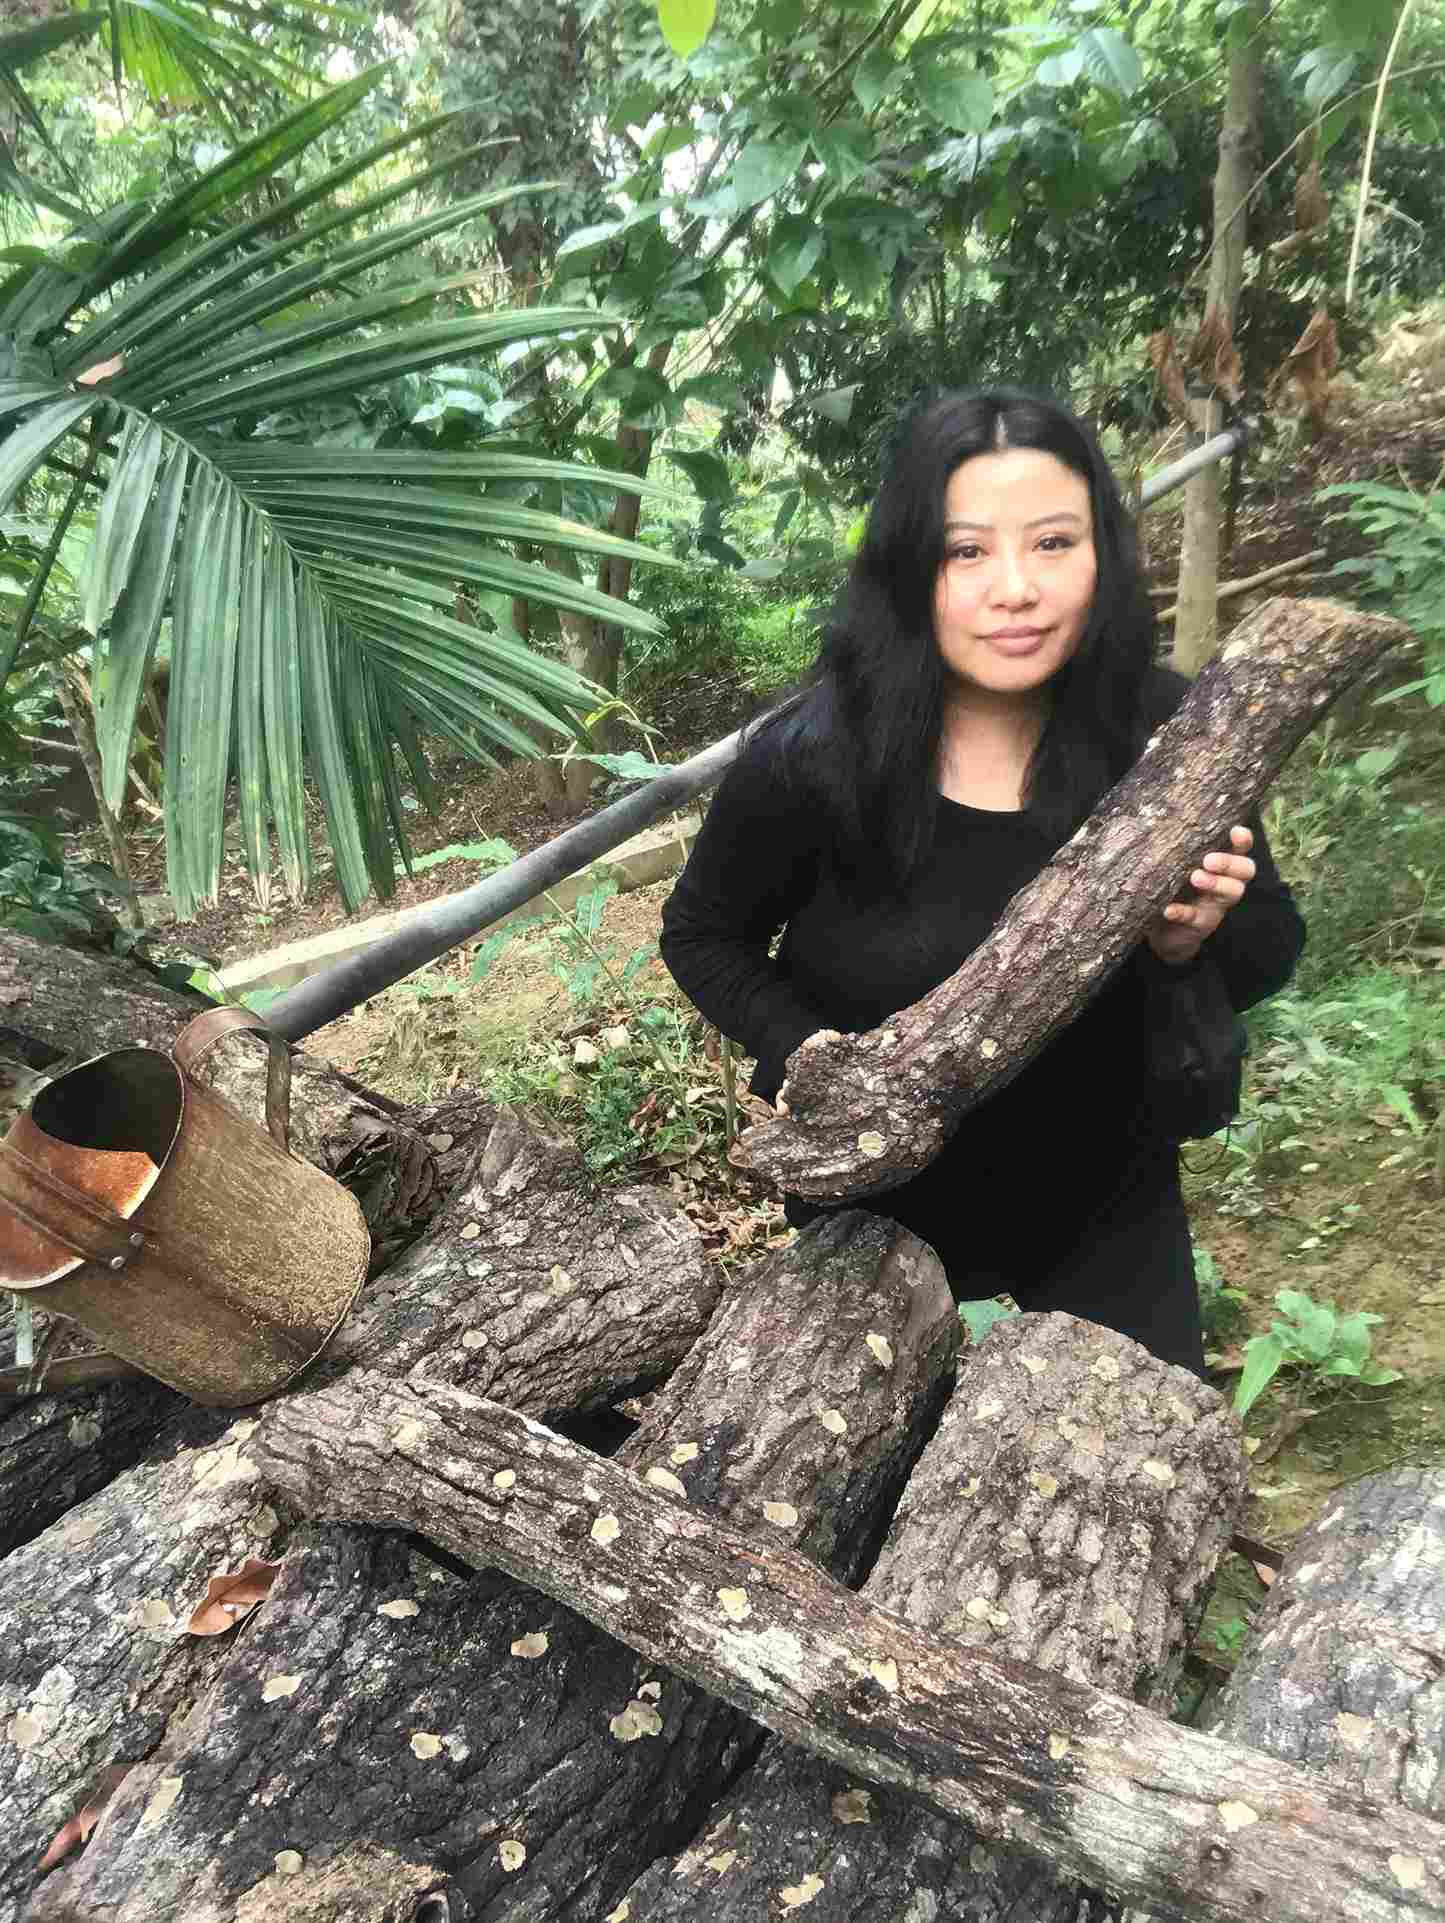 Lhüvevolü A Rhakho from Nagaland's Phek district has been cultivating shiitake mushrooms since 2019 and selling them through her brand Native Organics